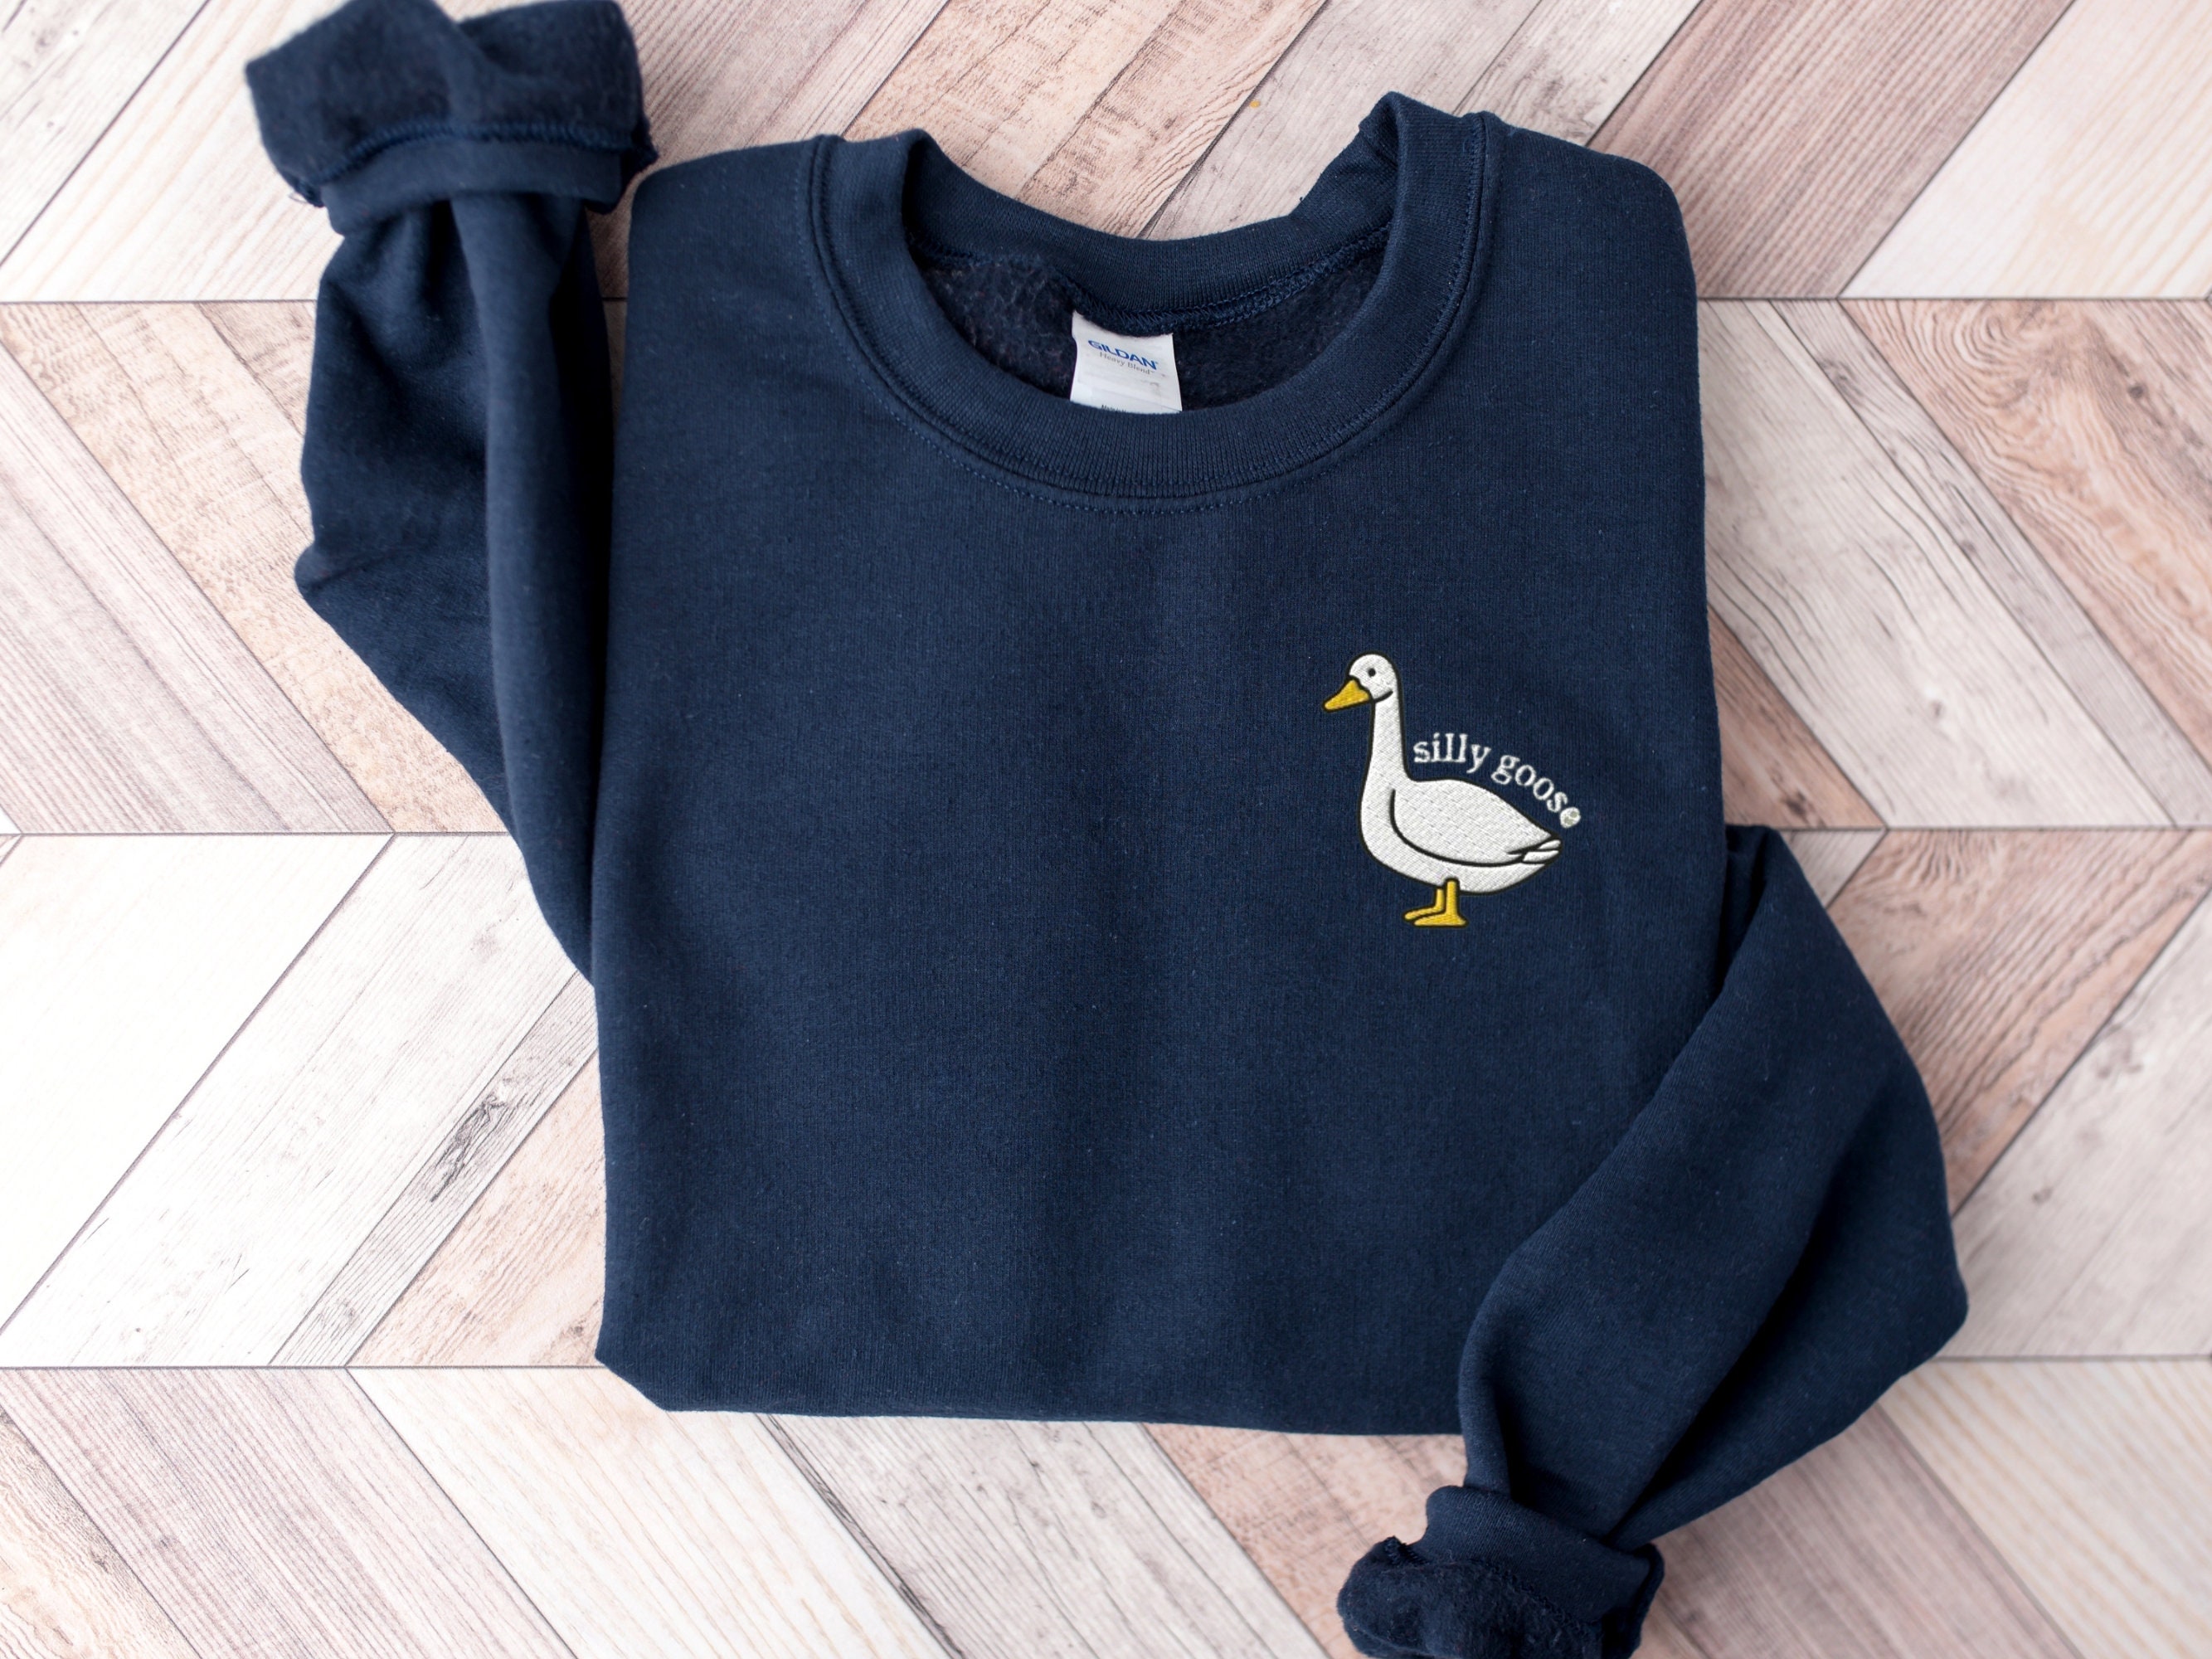 Embroidered Silly Goose Sweatshirt, Embroidered Goose Crewneck Sweatshirt, Silly Goose Shirt